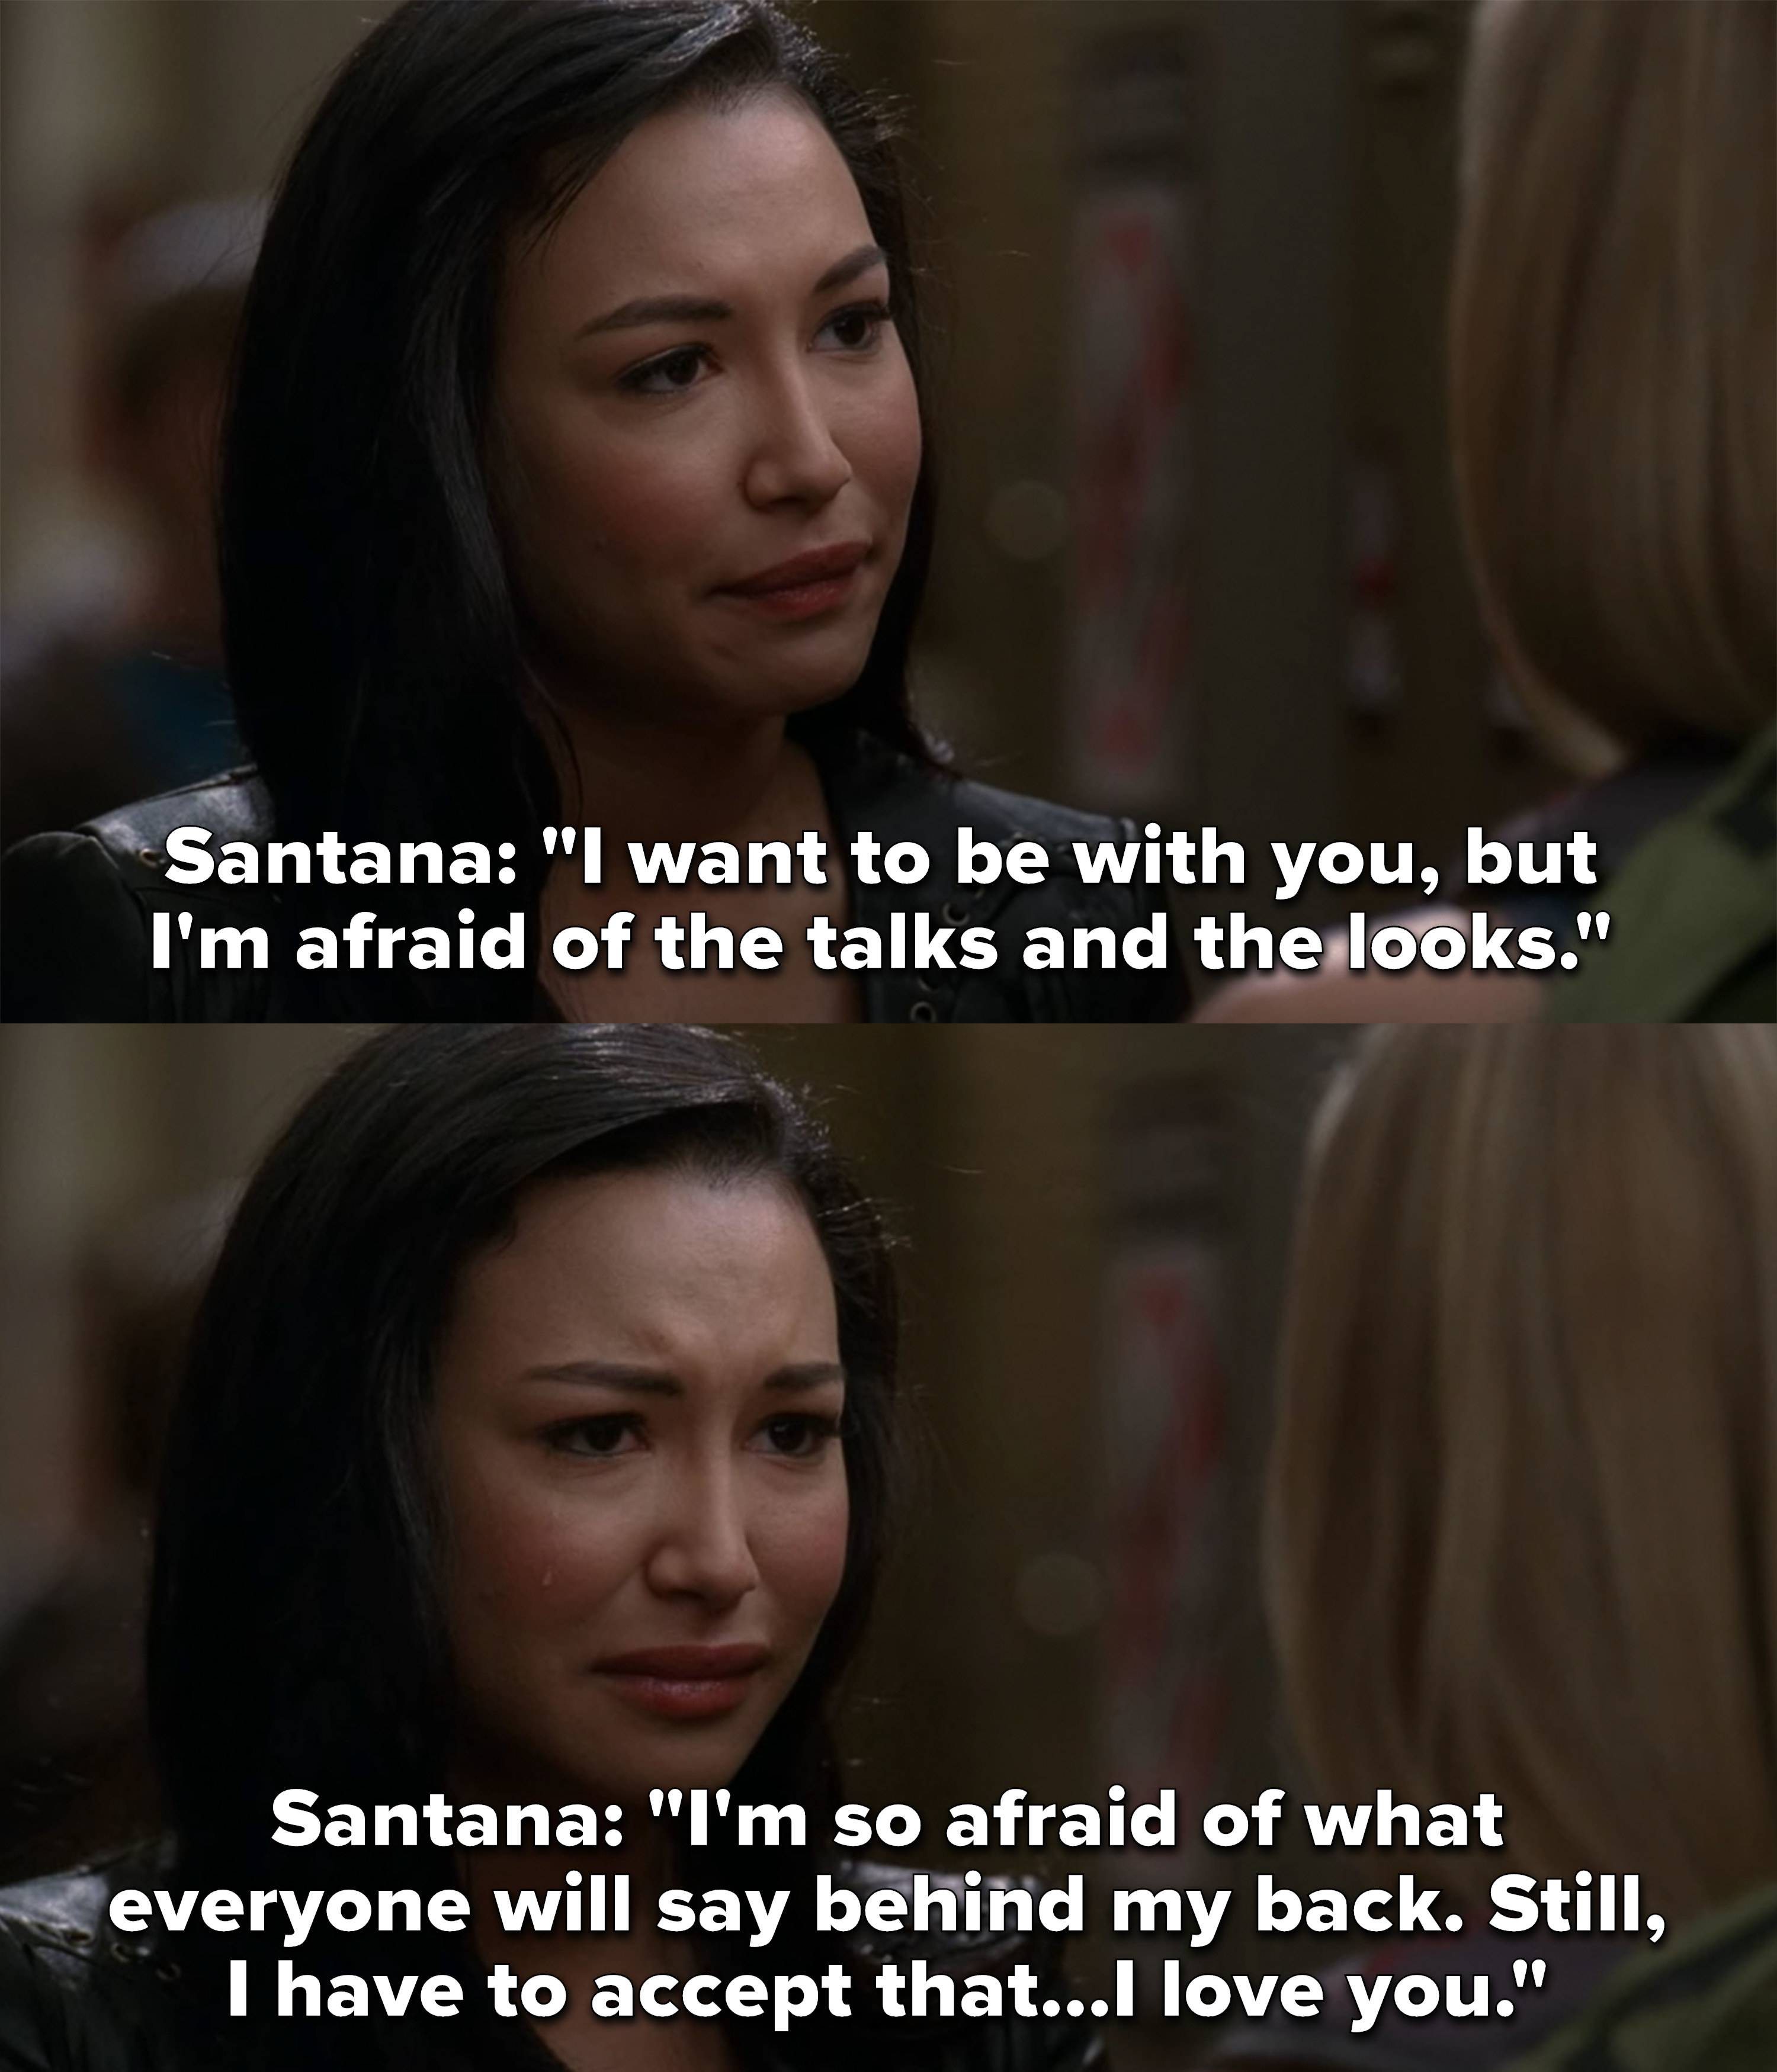 Santana: &quot;I want to be with you, but I&#x27;m afraid of the talks and the looks. I&#x27;m so afraid of what everyone will say behind my back. Still, I have to accept that I love you&quot;